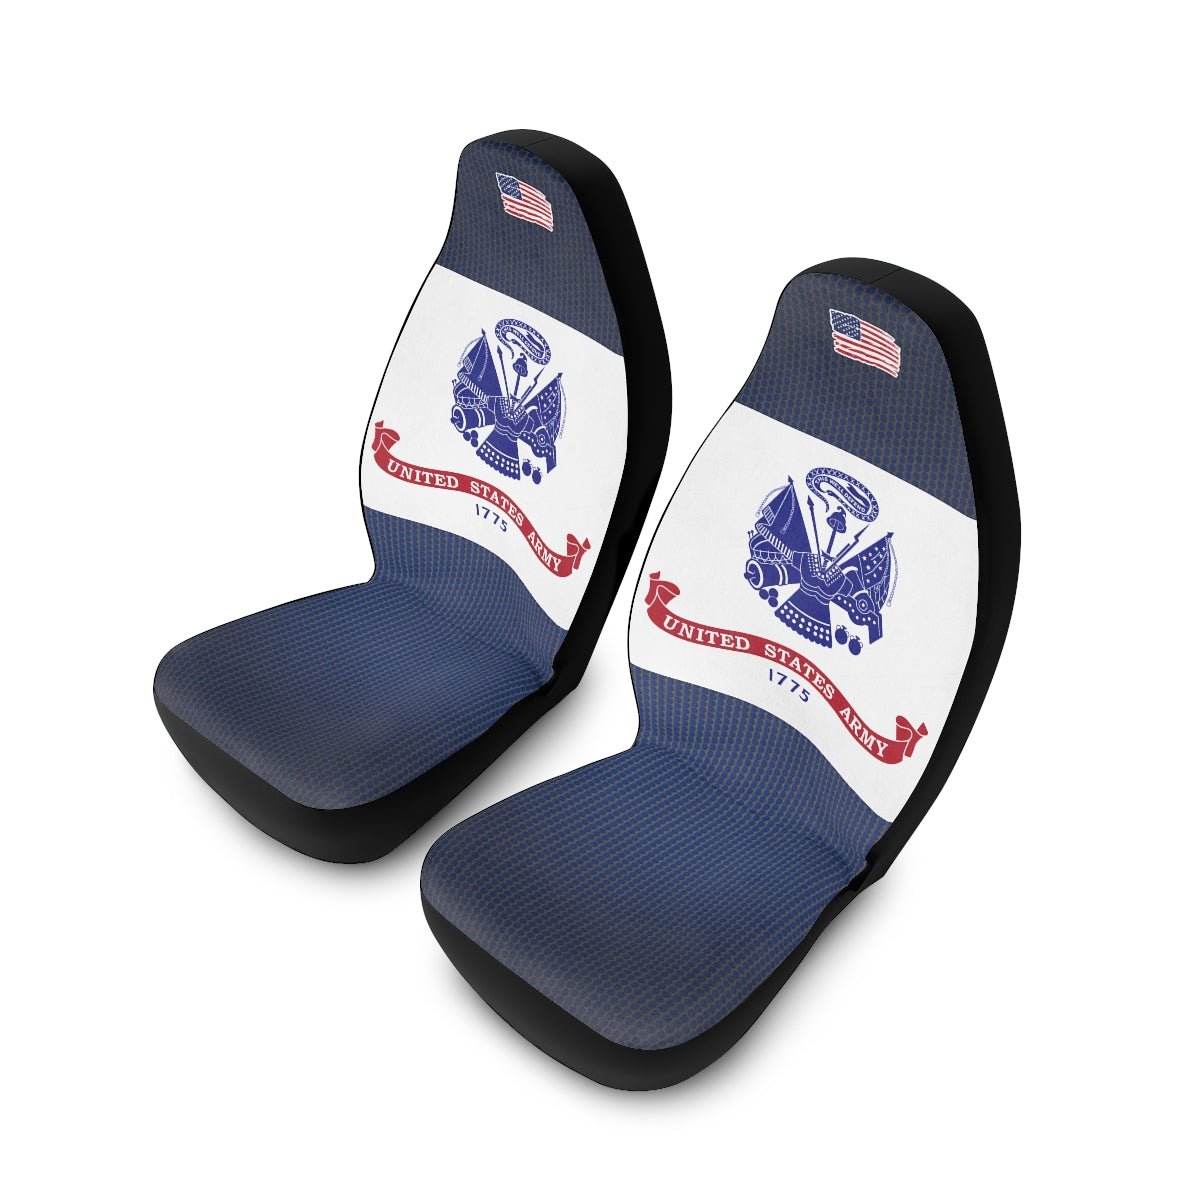 U.S. Army Dark Blue Polyester Car Seat Covers